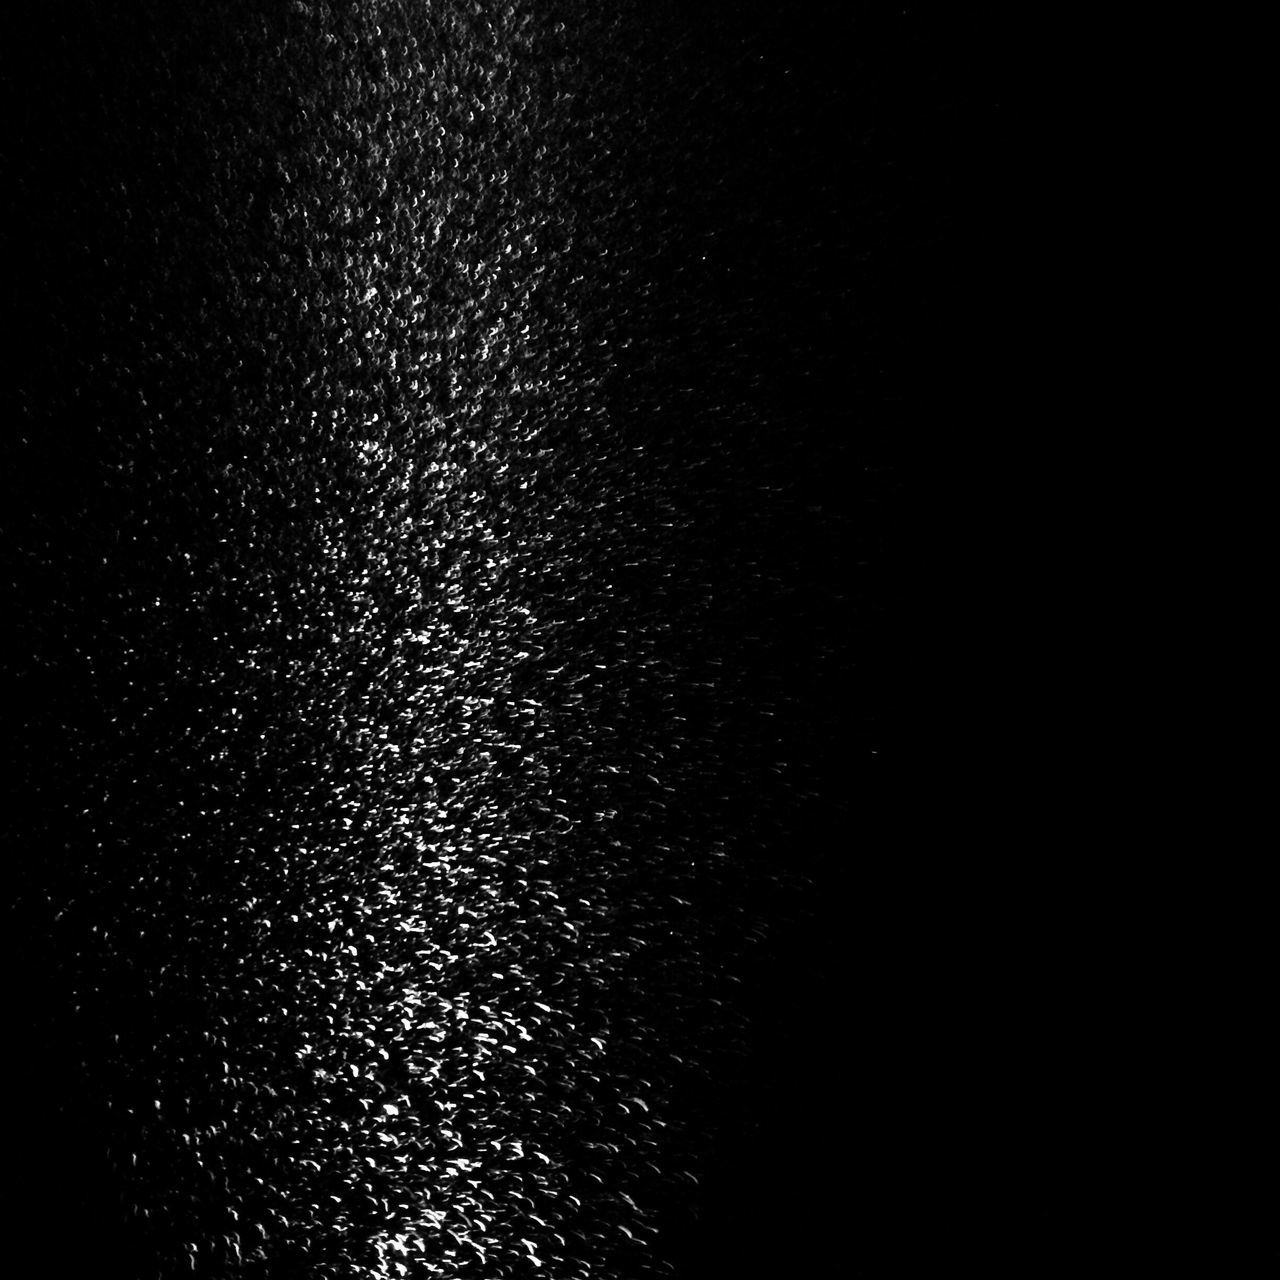 ABSTRACT IMAGE OF ILLUMINATED LIGHTS OVER BLACK BACKGROUND